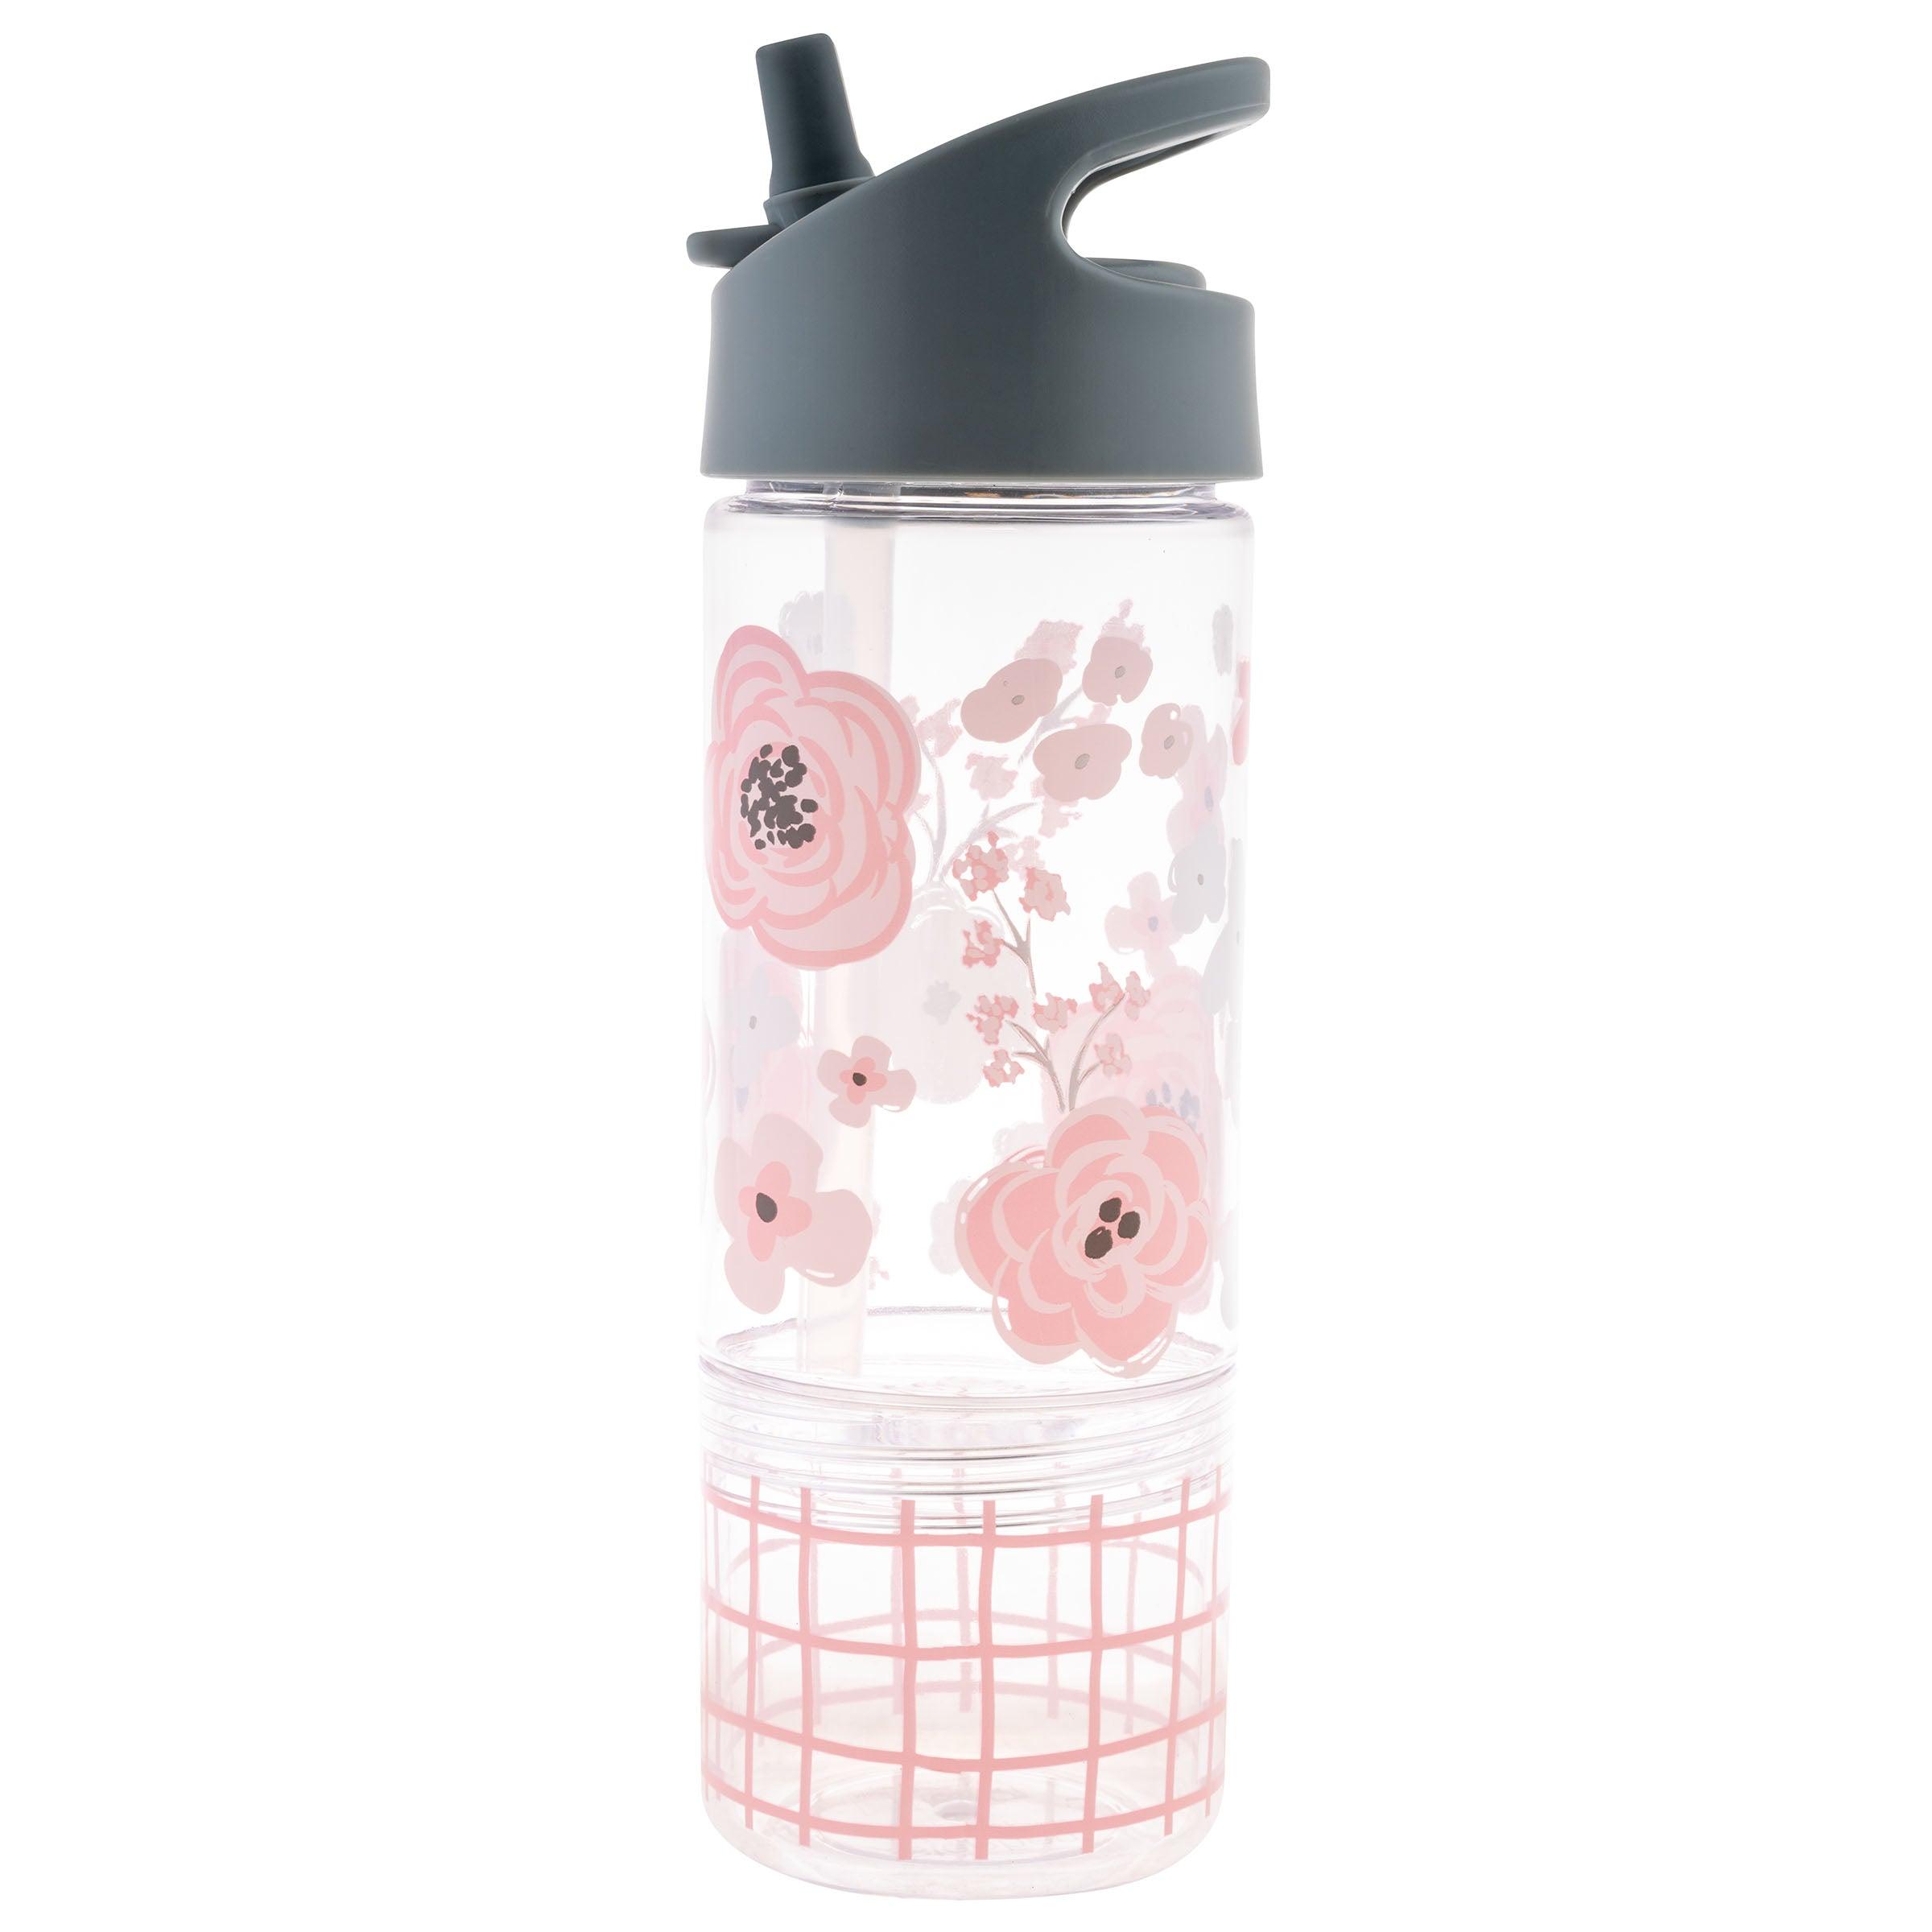 Stephen Joseph Sip And Snack Flower Water Bottle - BumbleToys - 5-7 Years, Cecil, Girls, Pre-Order, School Supplies, Water Bottle